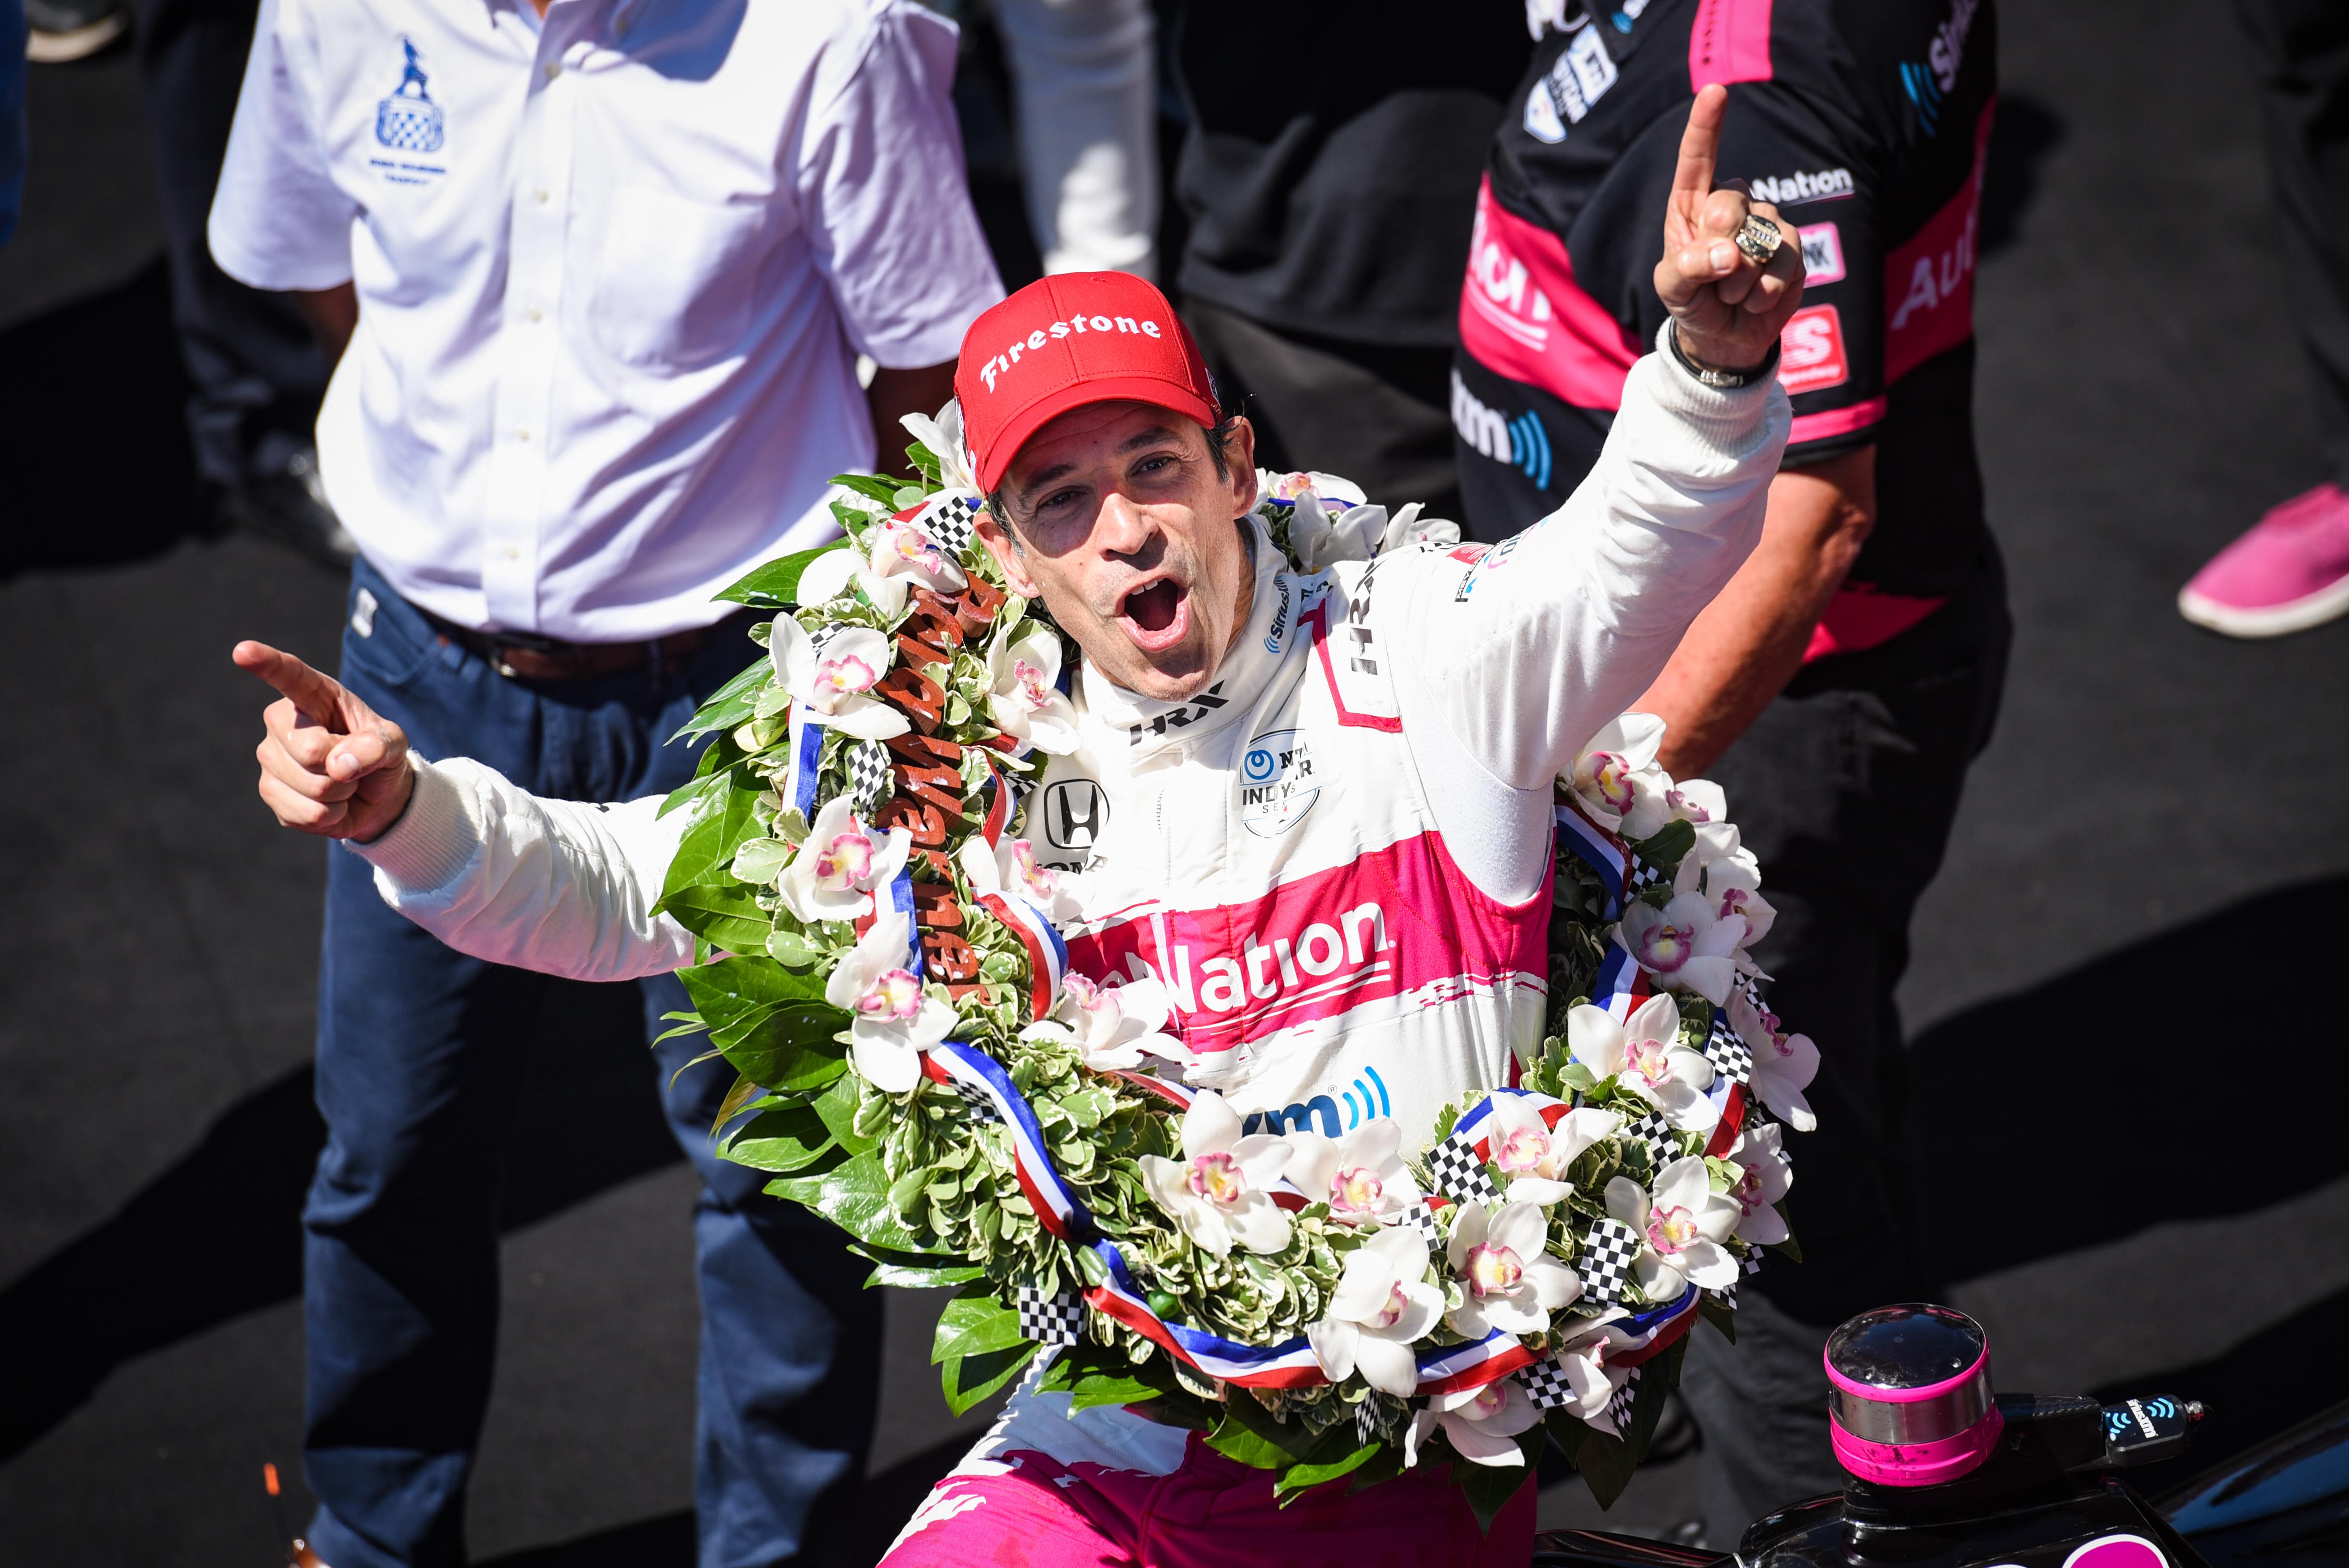 image of Helio Castroneves celebrating at Indy 500